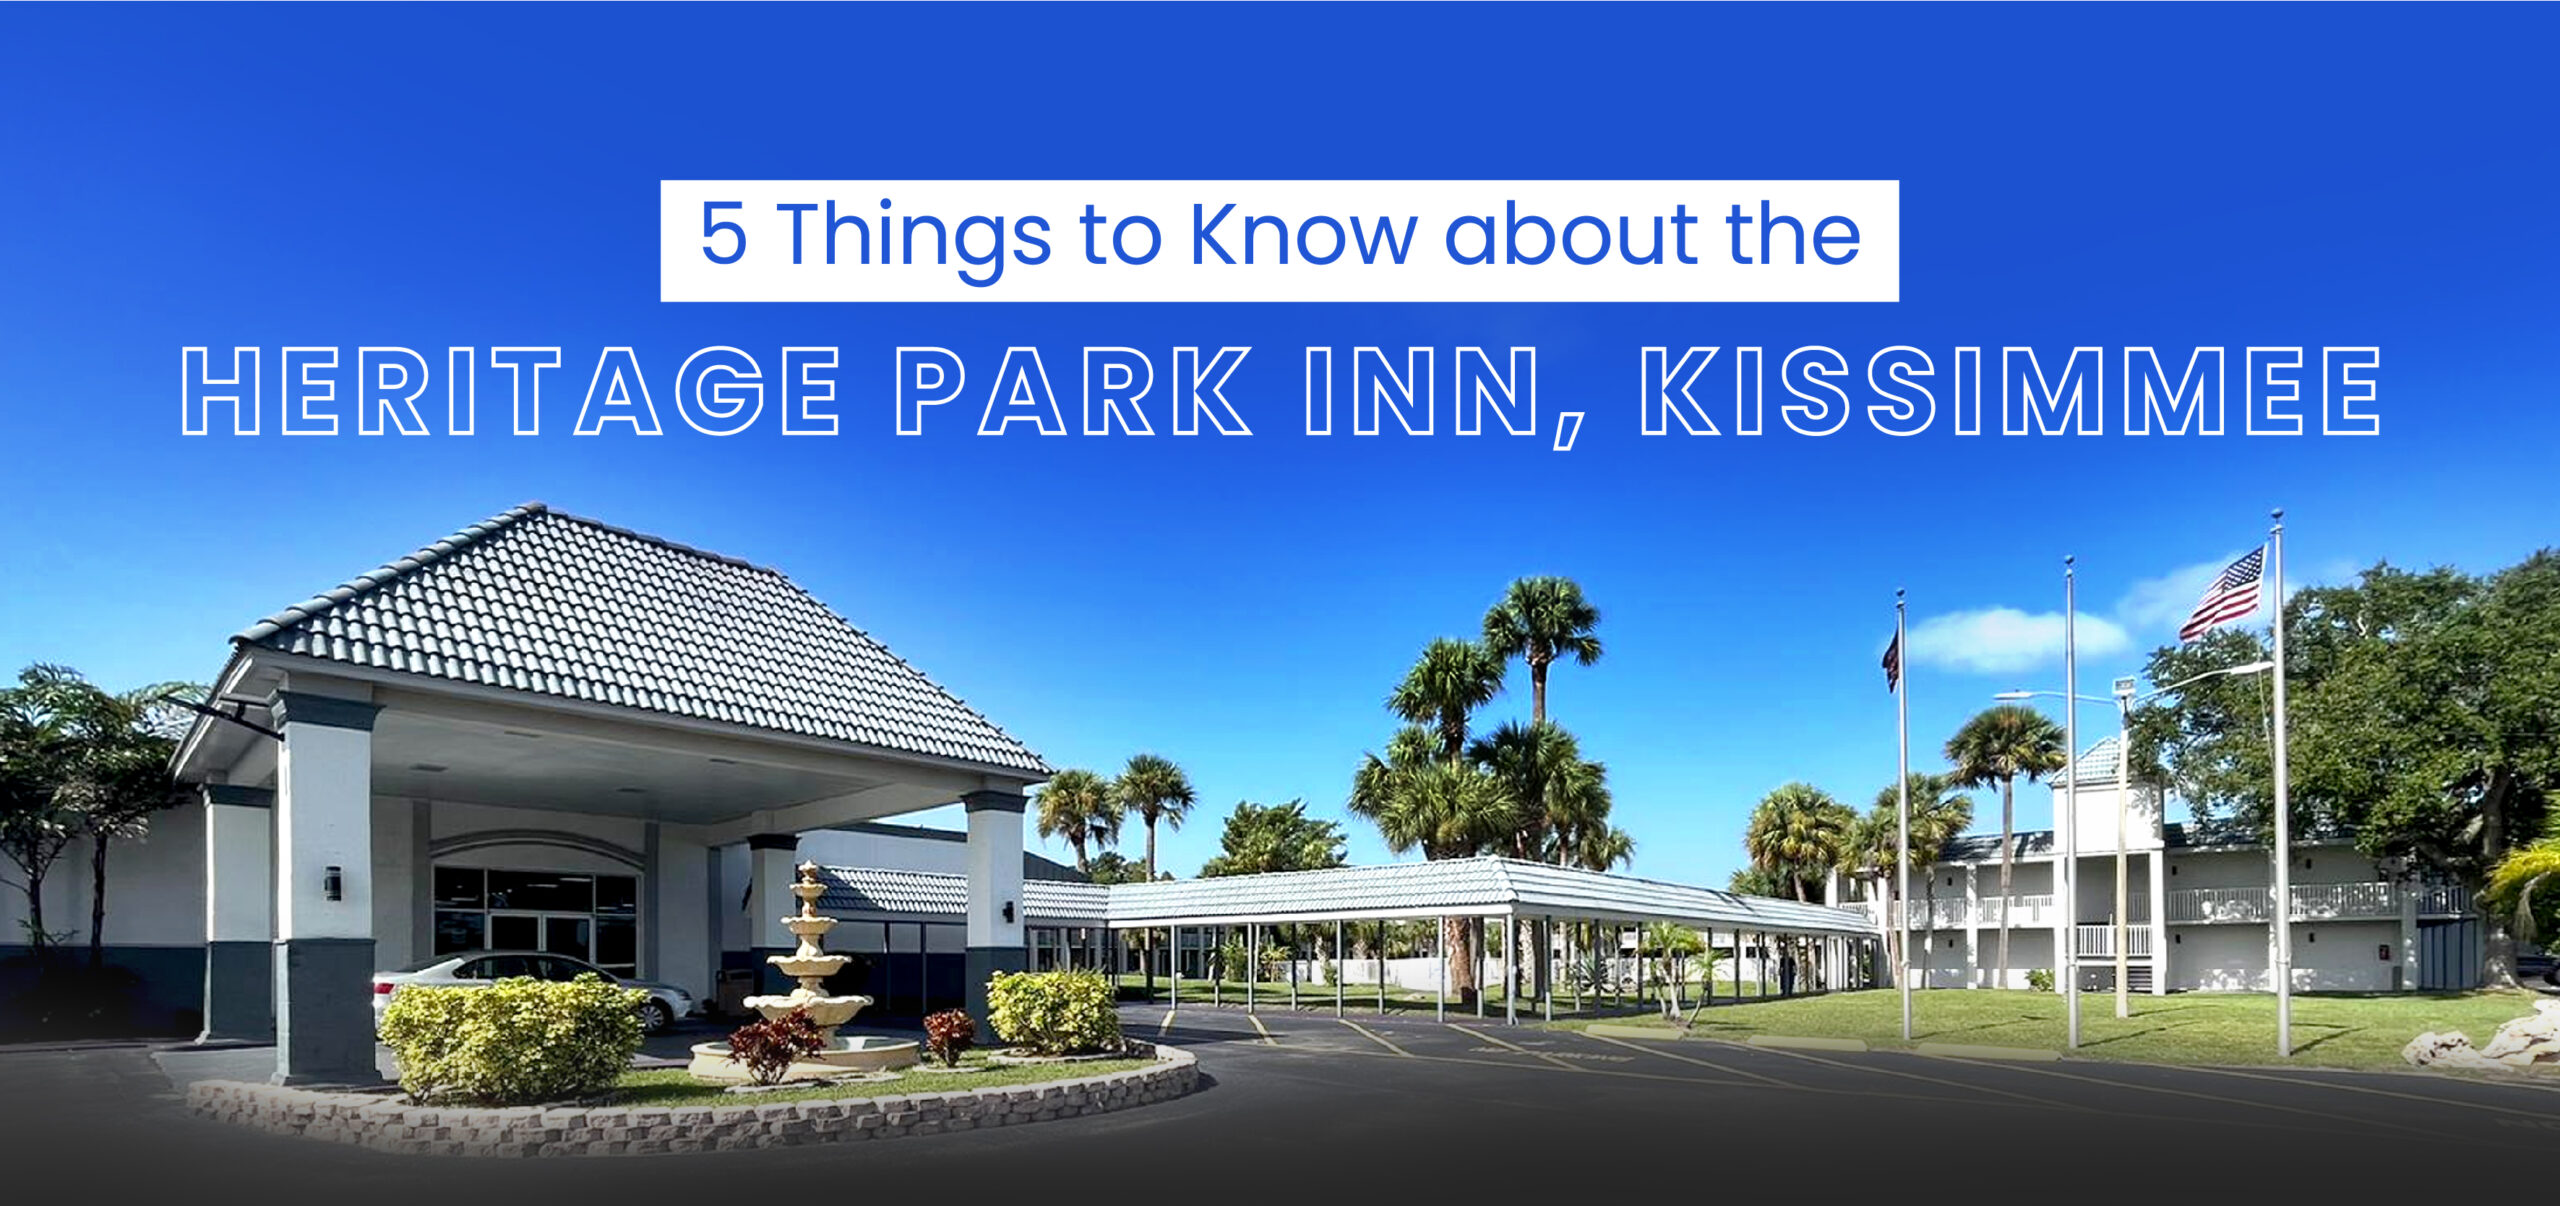 5 Things to Know about the Heritage Park Inn, Kissimmee